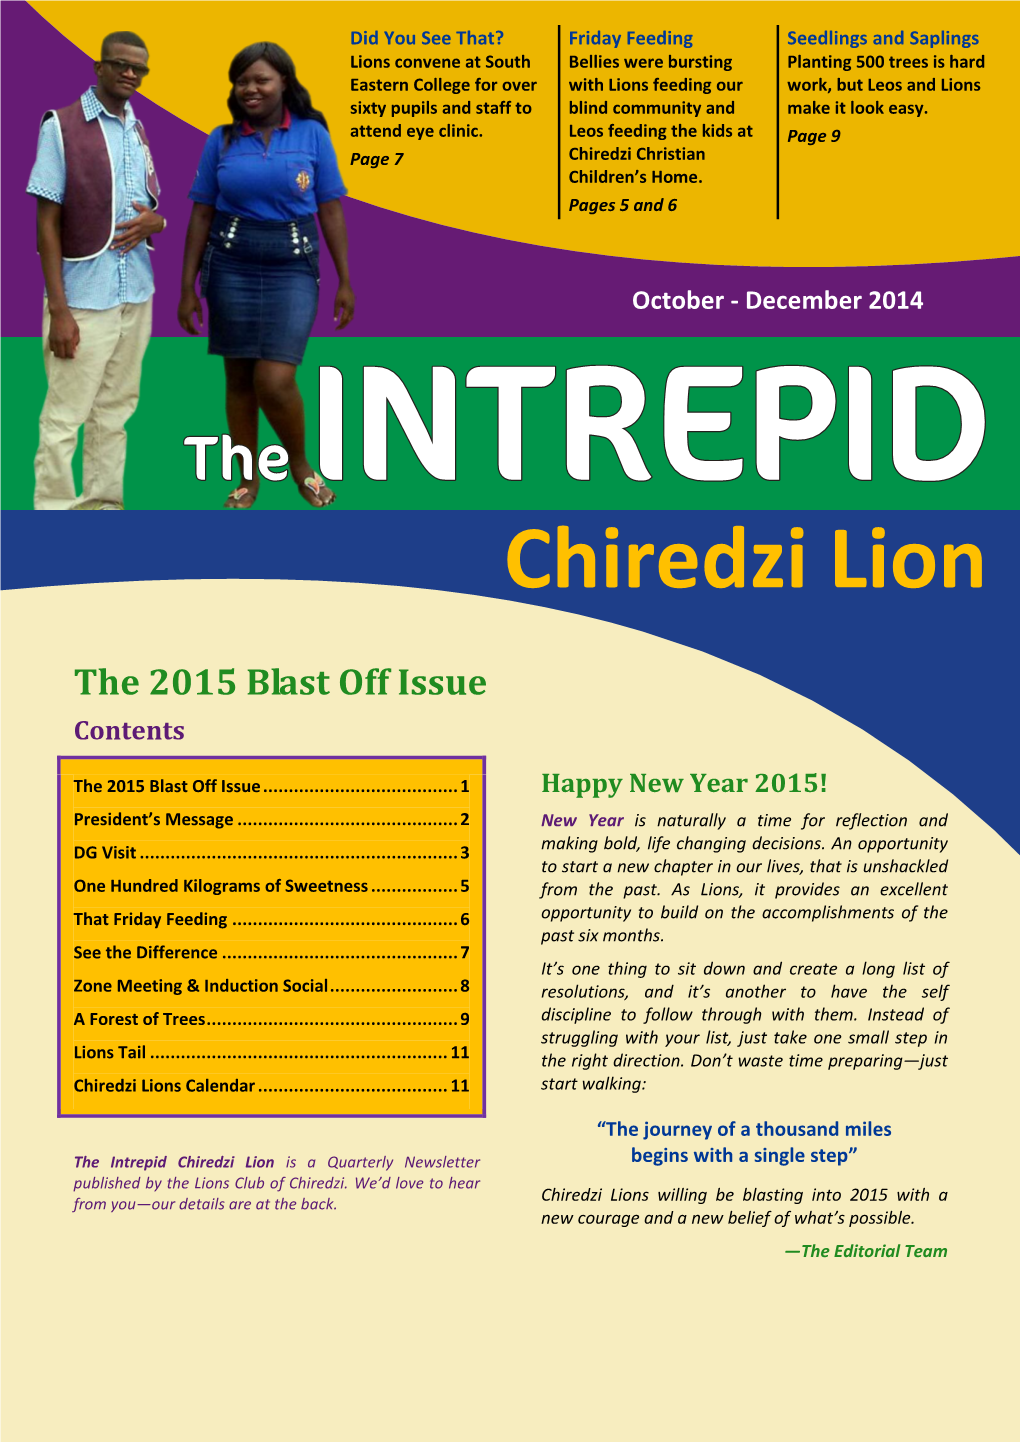 The Intrepid Chiredzi Lion Is a Quarterly Newsletter Begins with a Single Step” Published by the Lions Club of Chiredzi